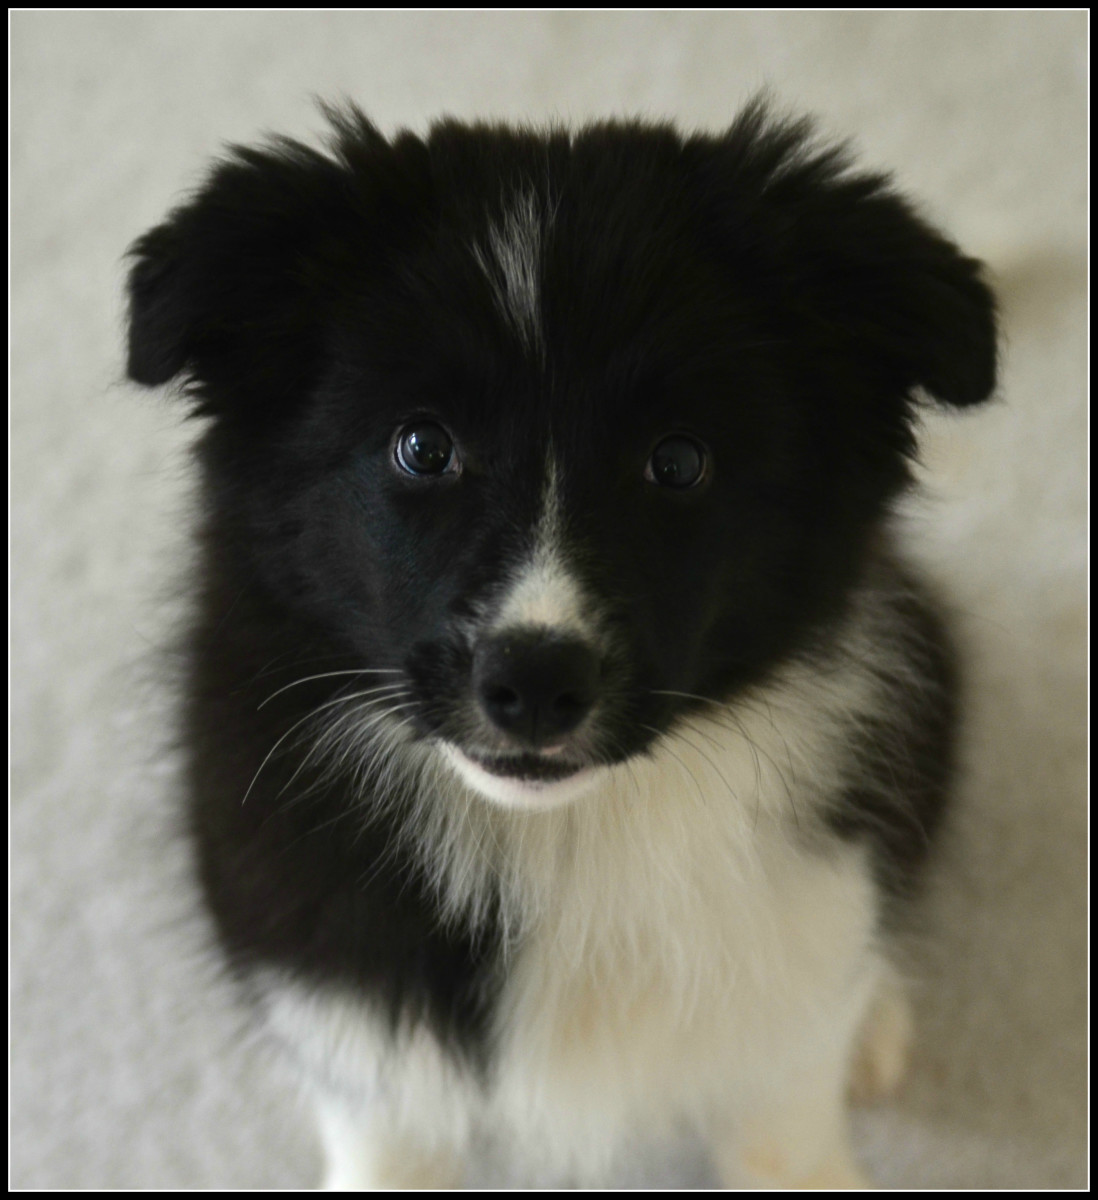 Pictures of Puppies 45 Free Cute Border Collie Puppy